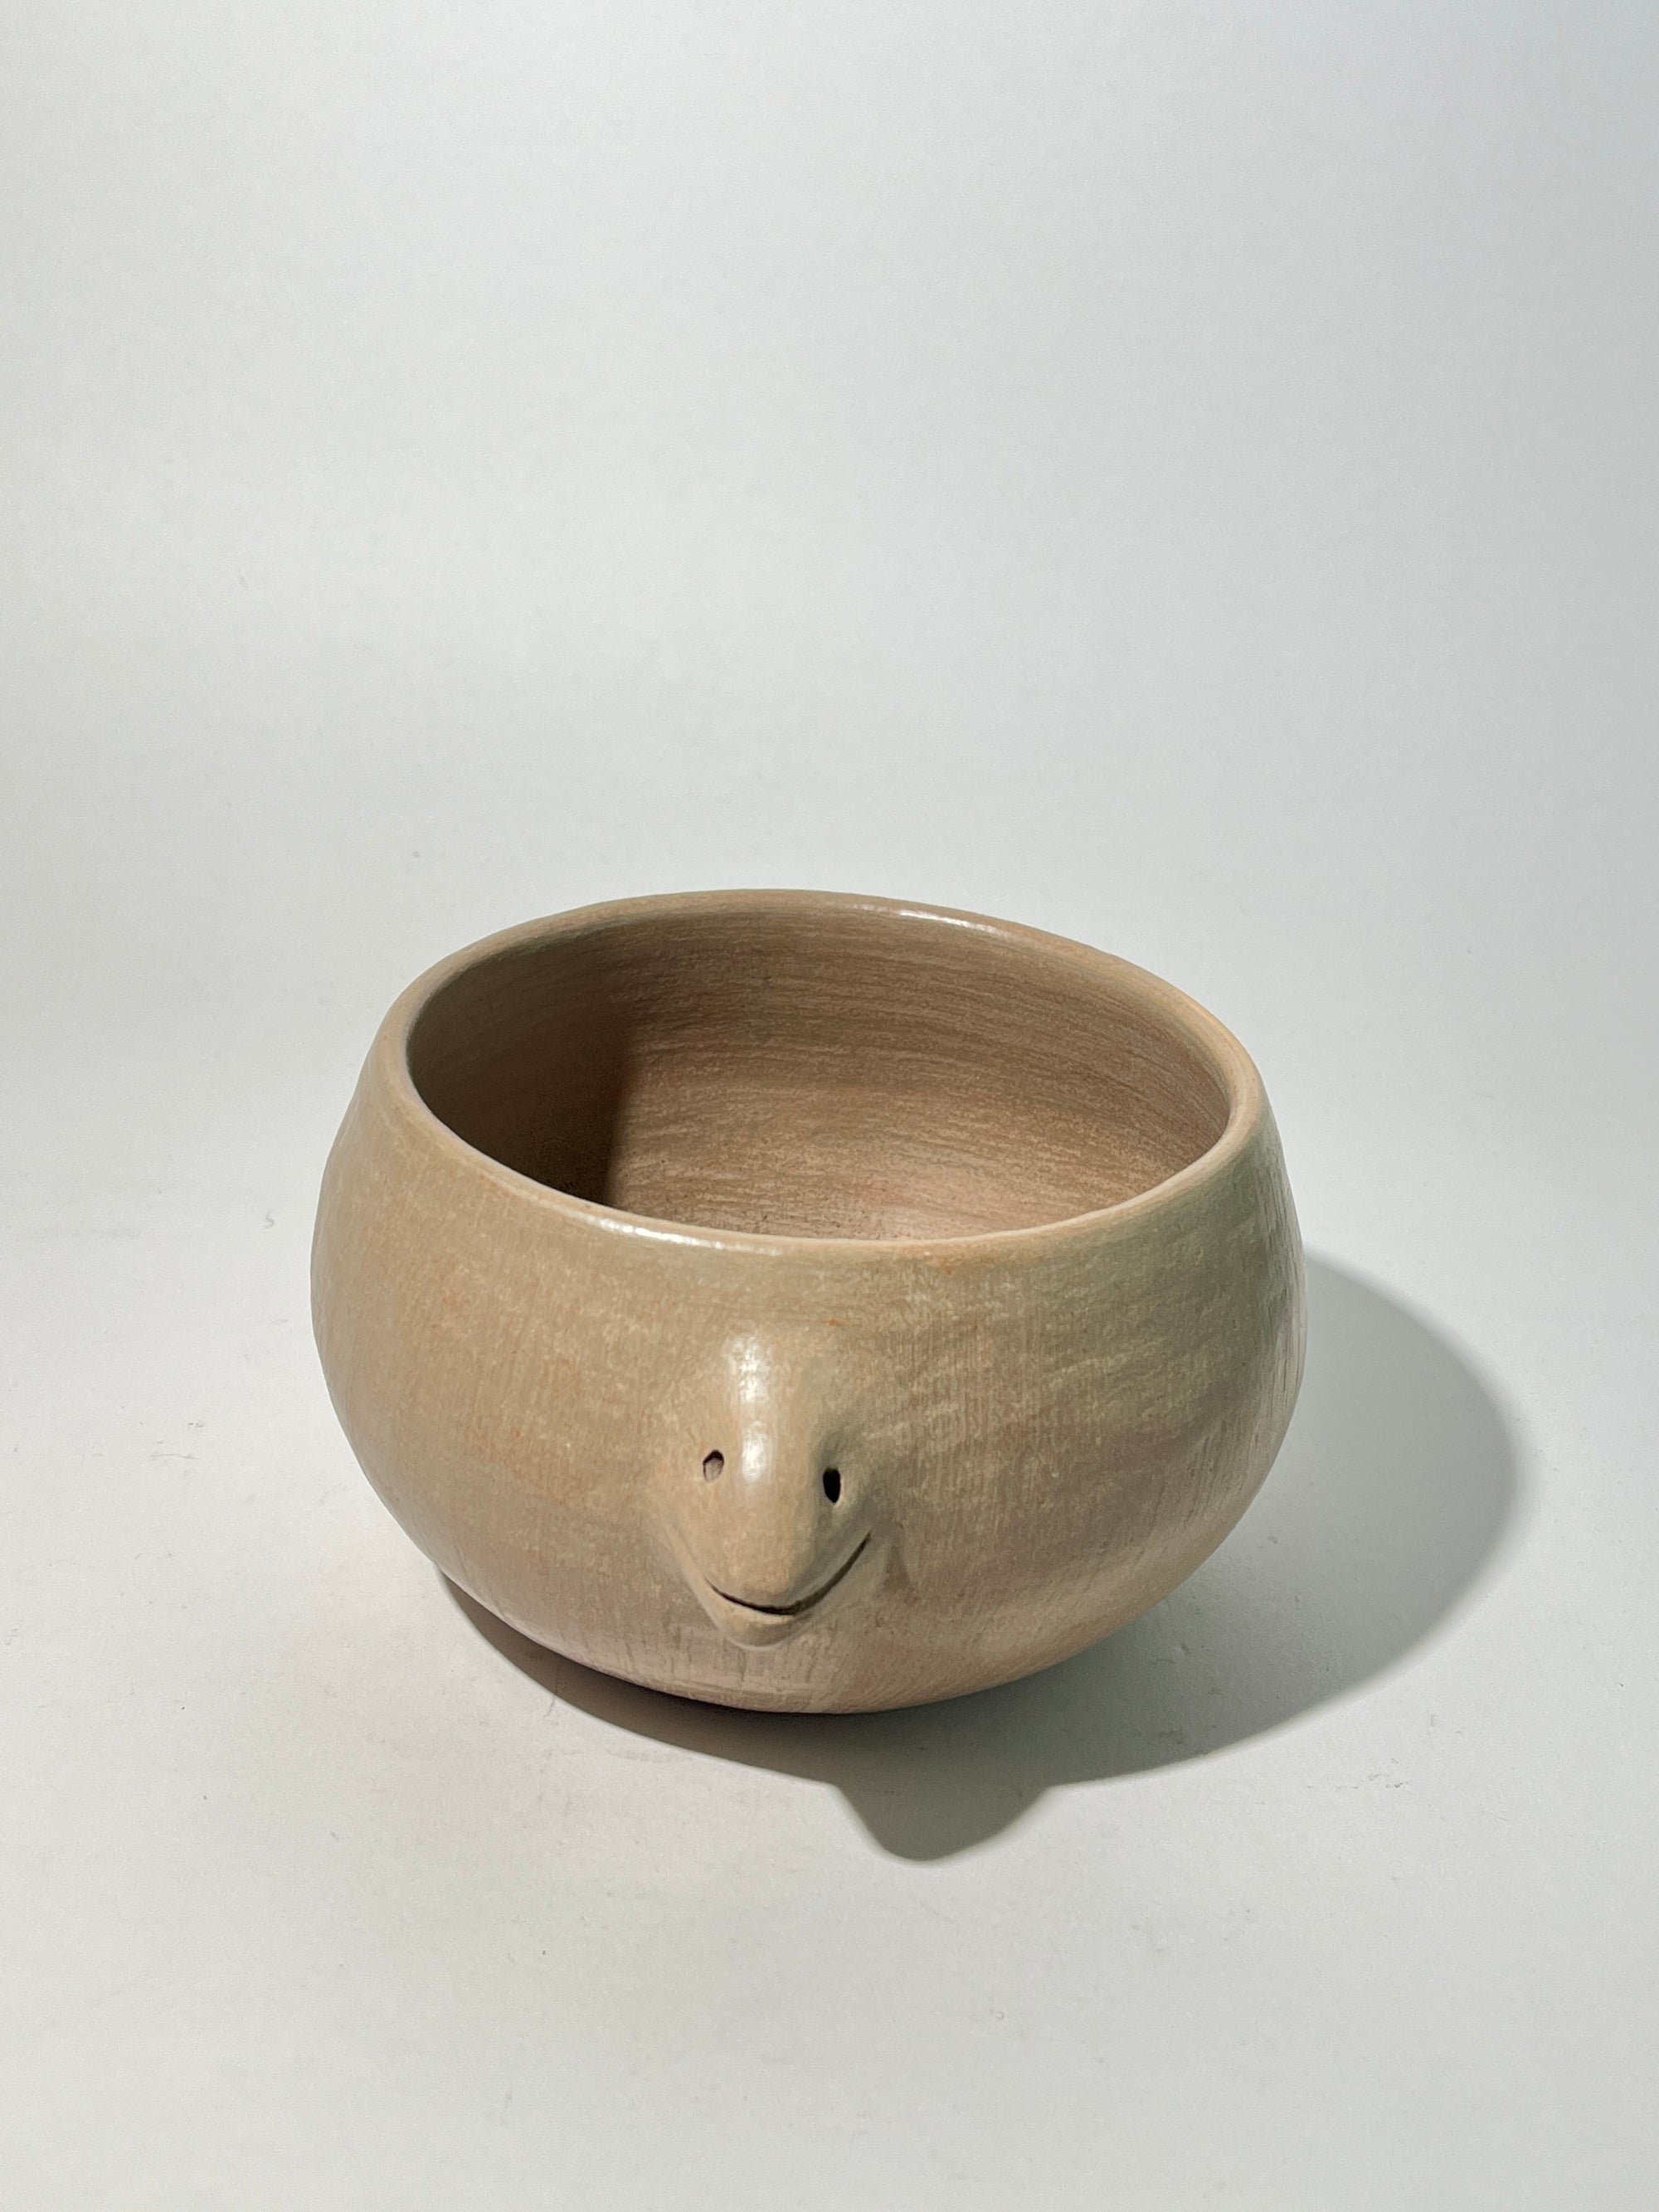 Handmade Mexican Clay Bowl with Faces